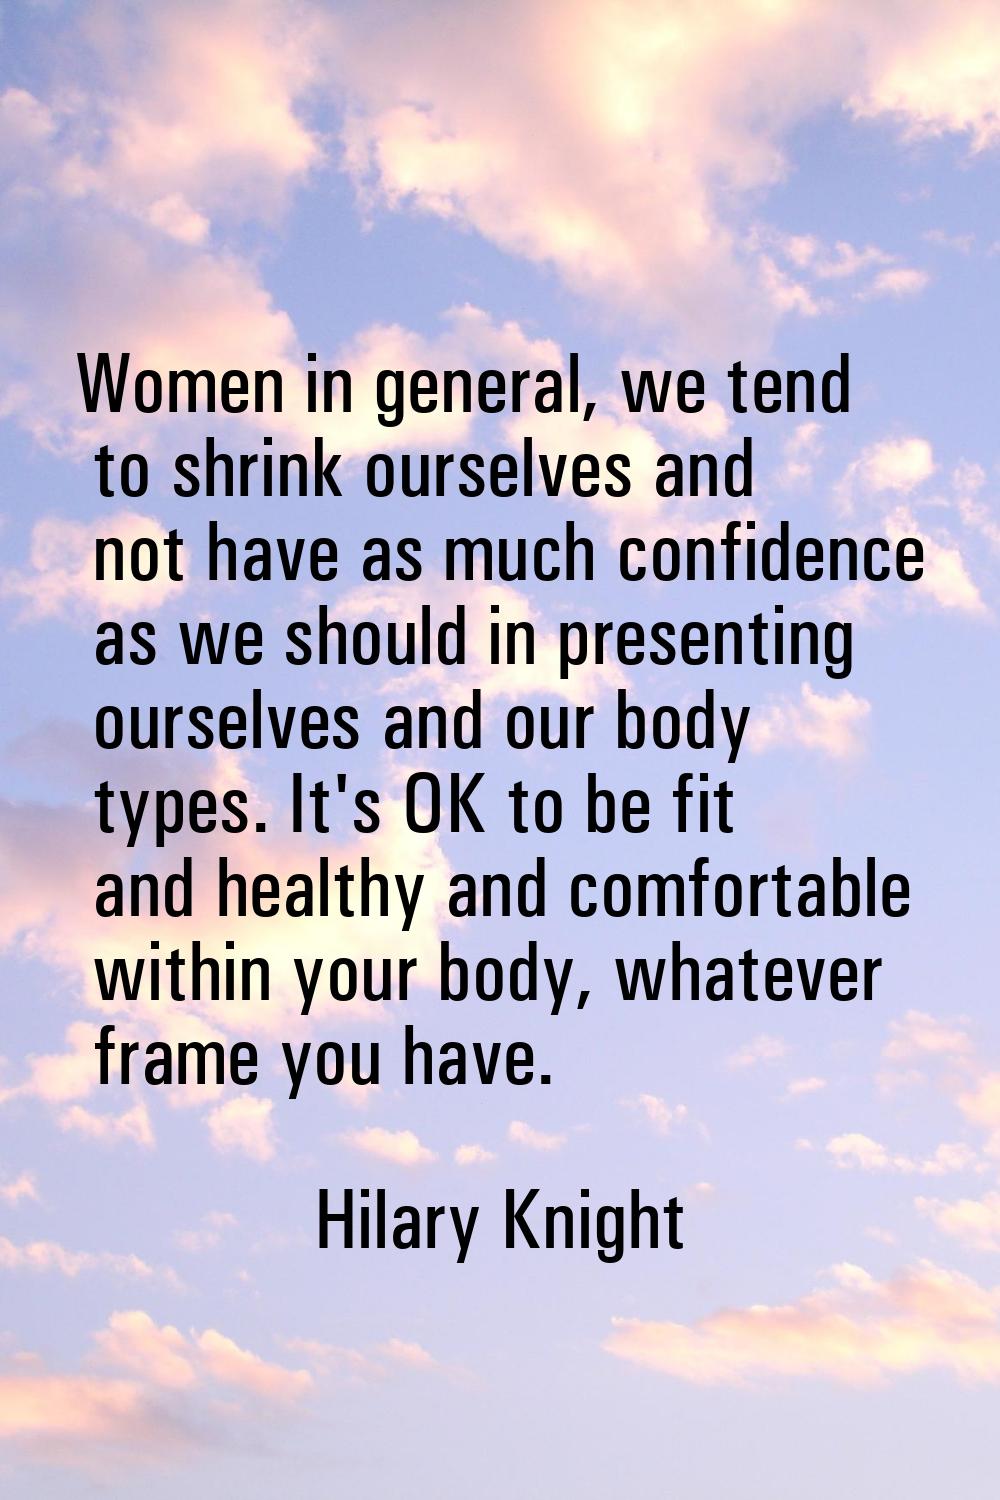 Women in general, we tend to shrink ourselves and not have as much confidence as we should in prese